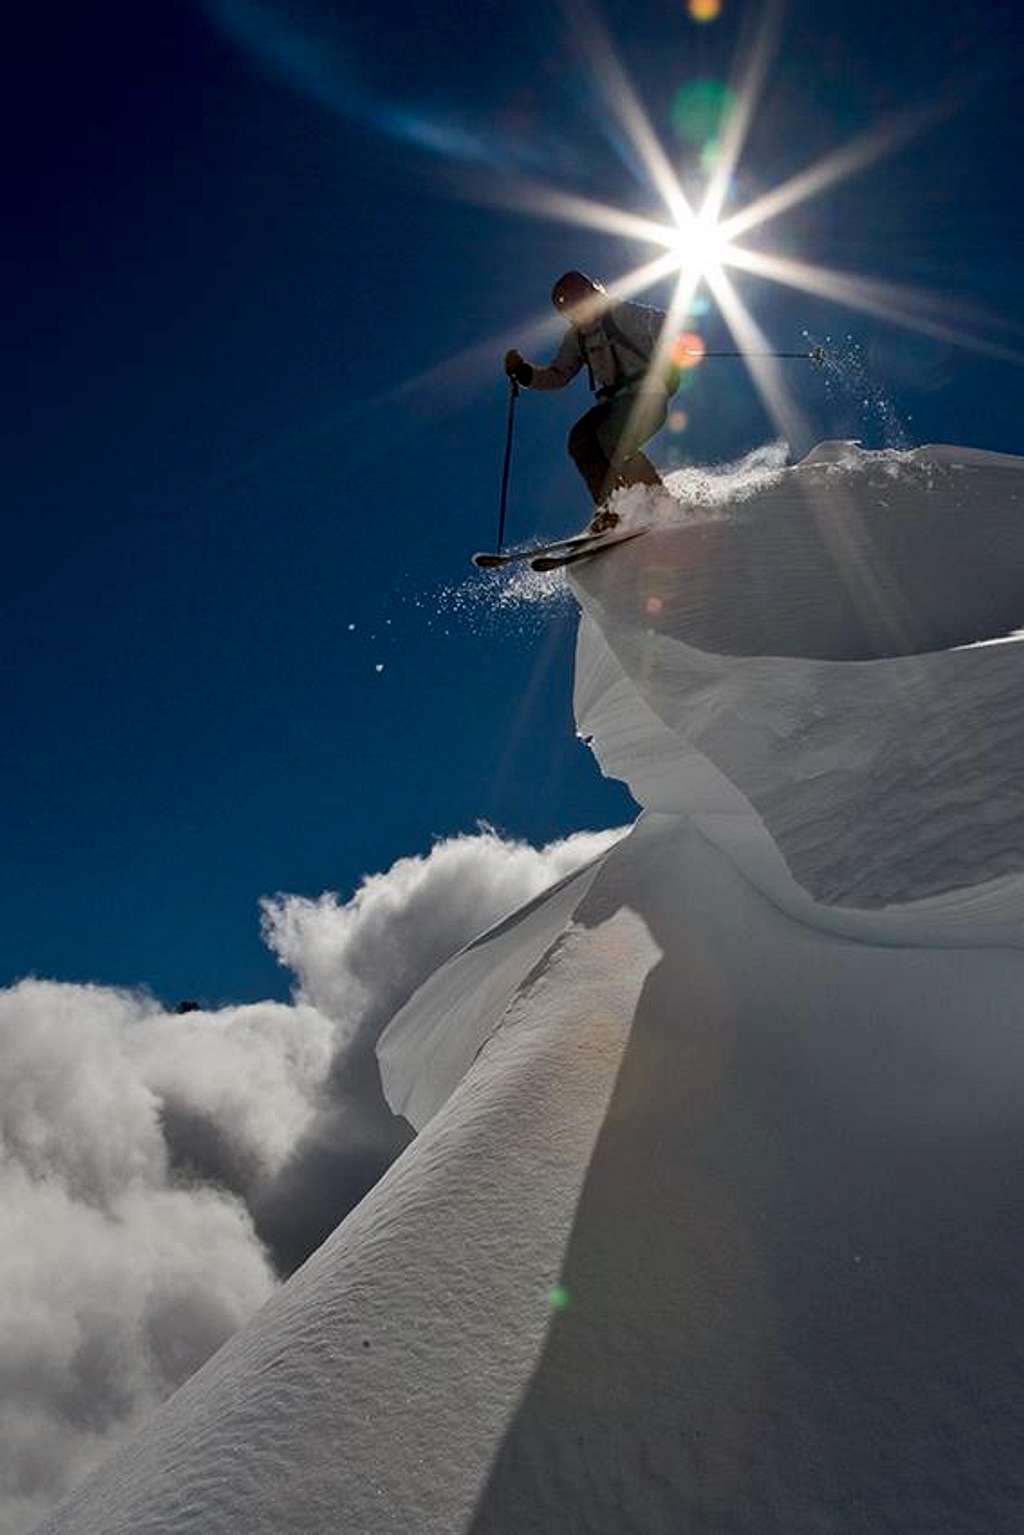 Skiing off a cornice on a perfect powder descent